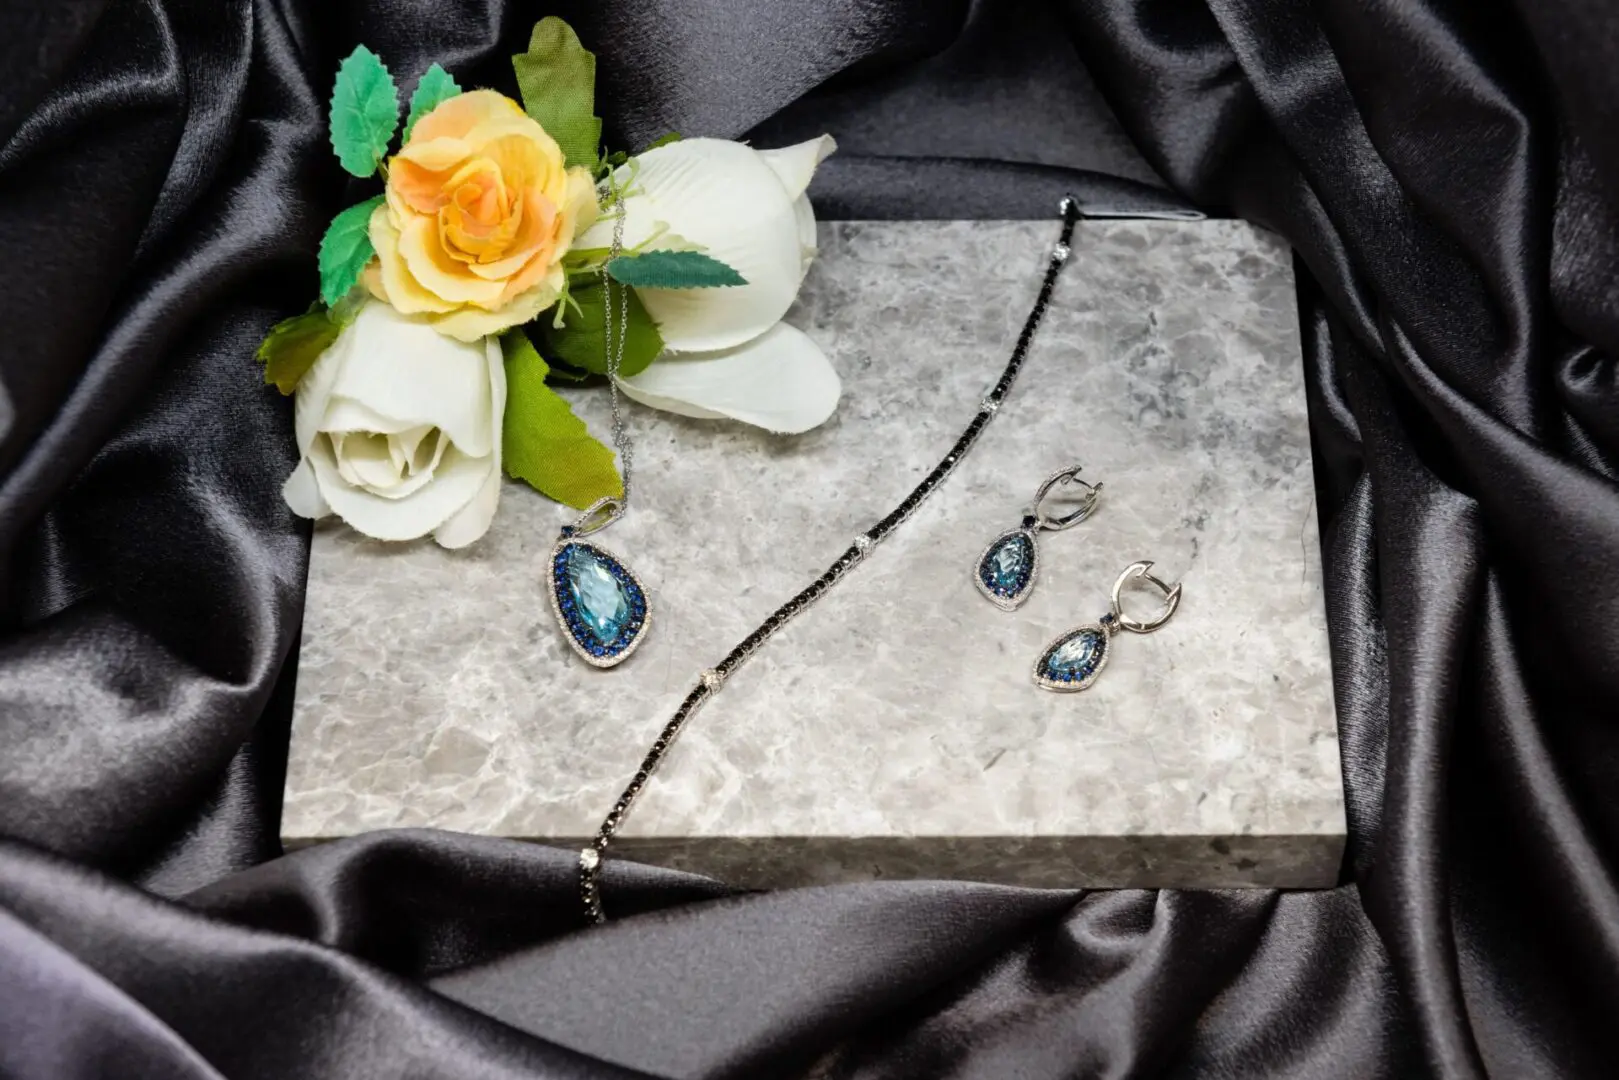 A marble board with two earrings and a flower on it.